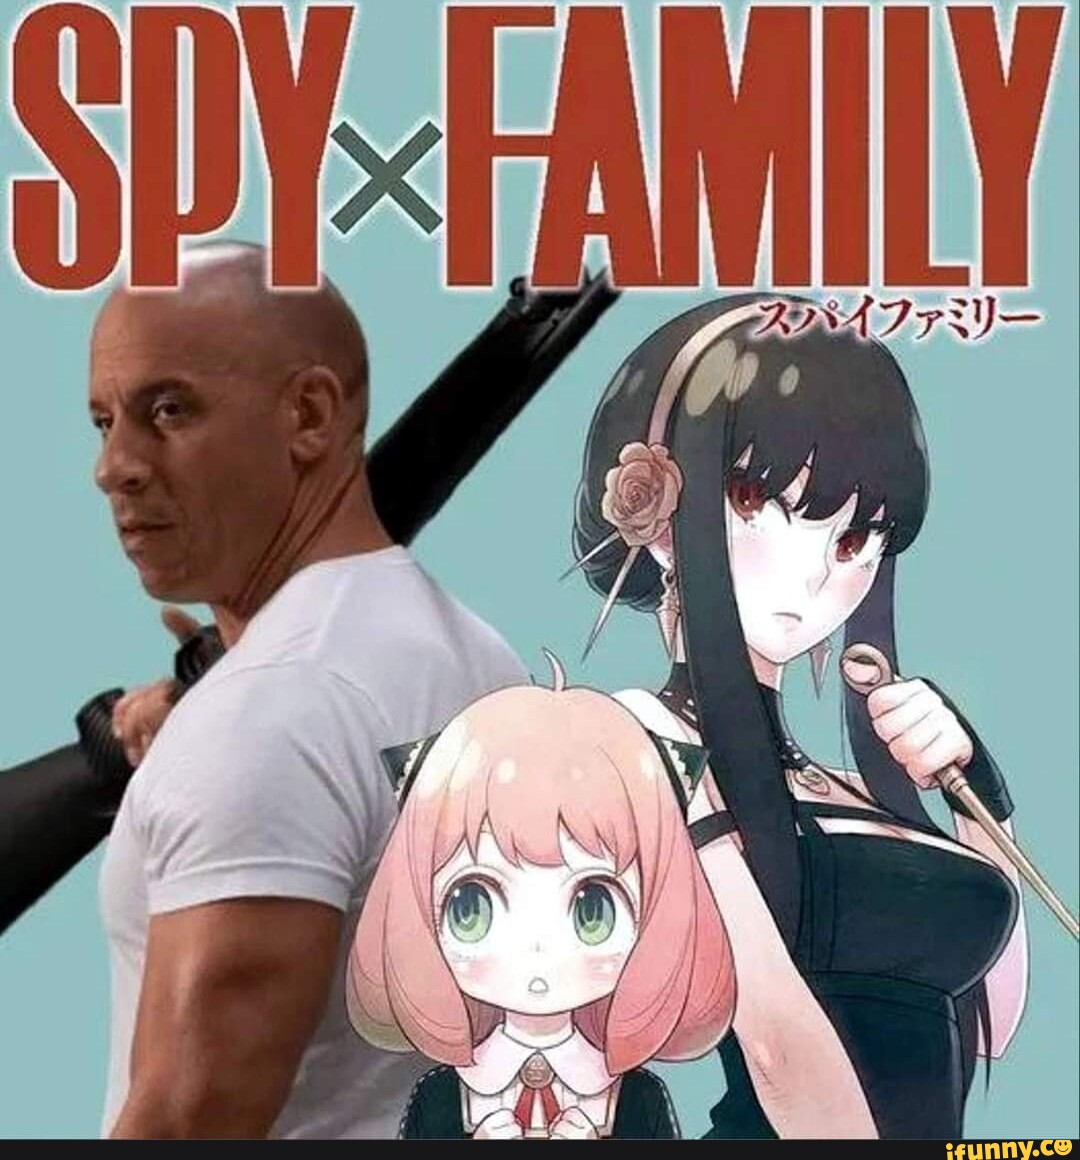 Spy x Family is getting shafted so they're offing Anya - iFunny Brazil